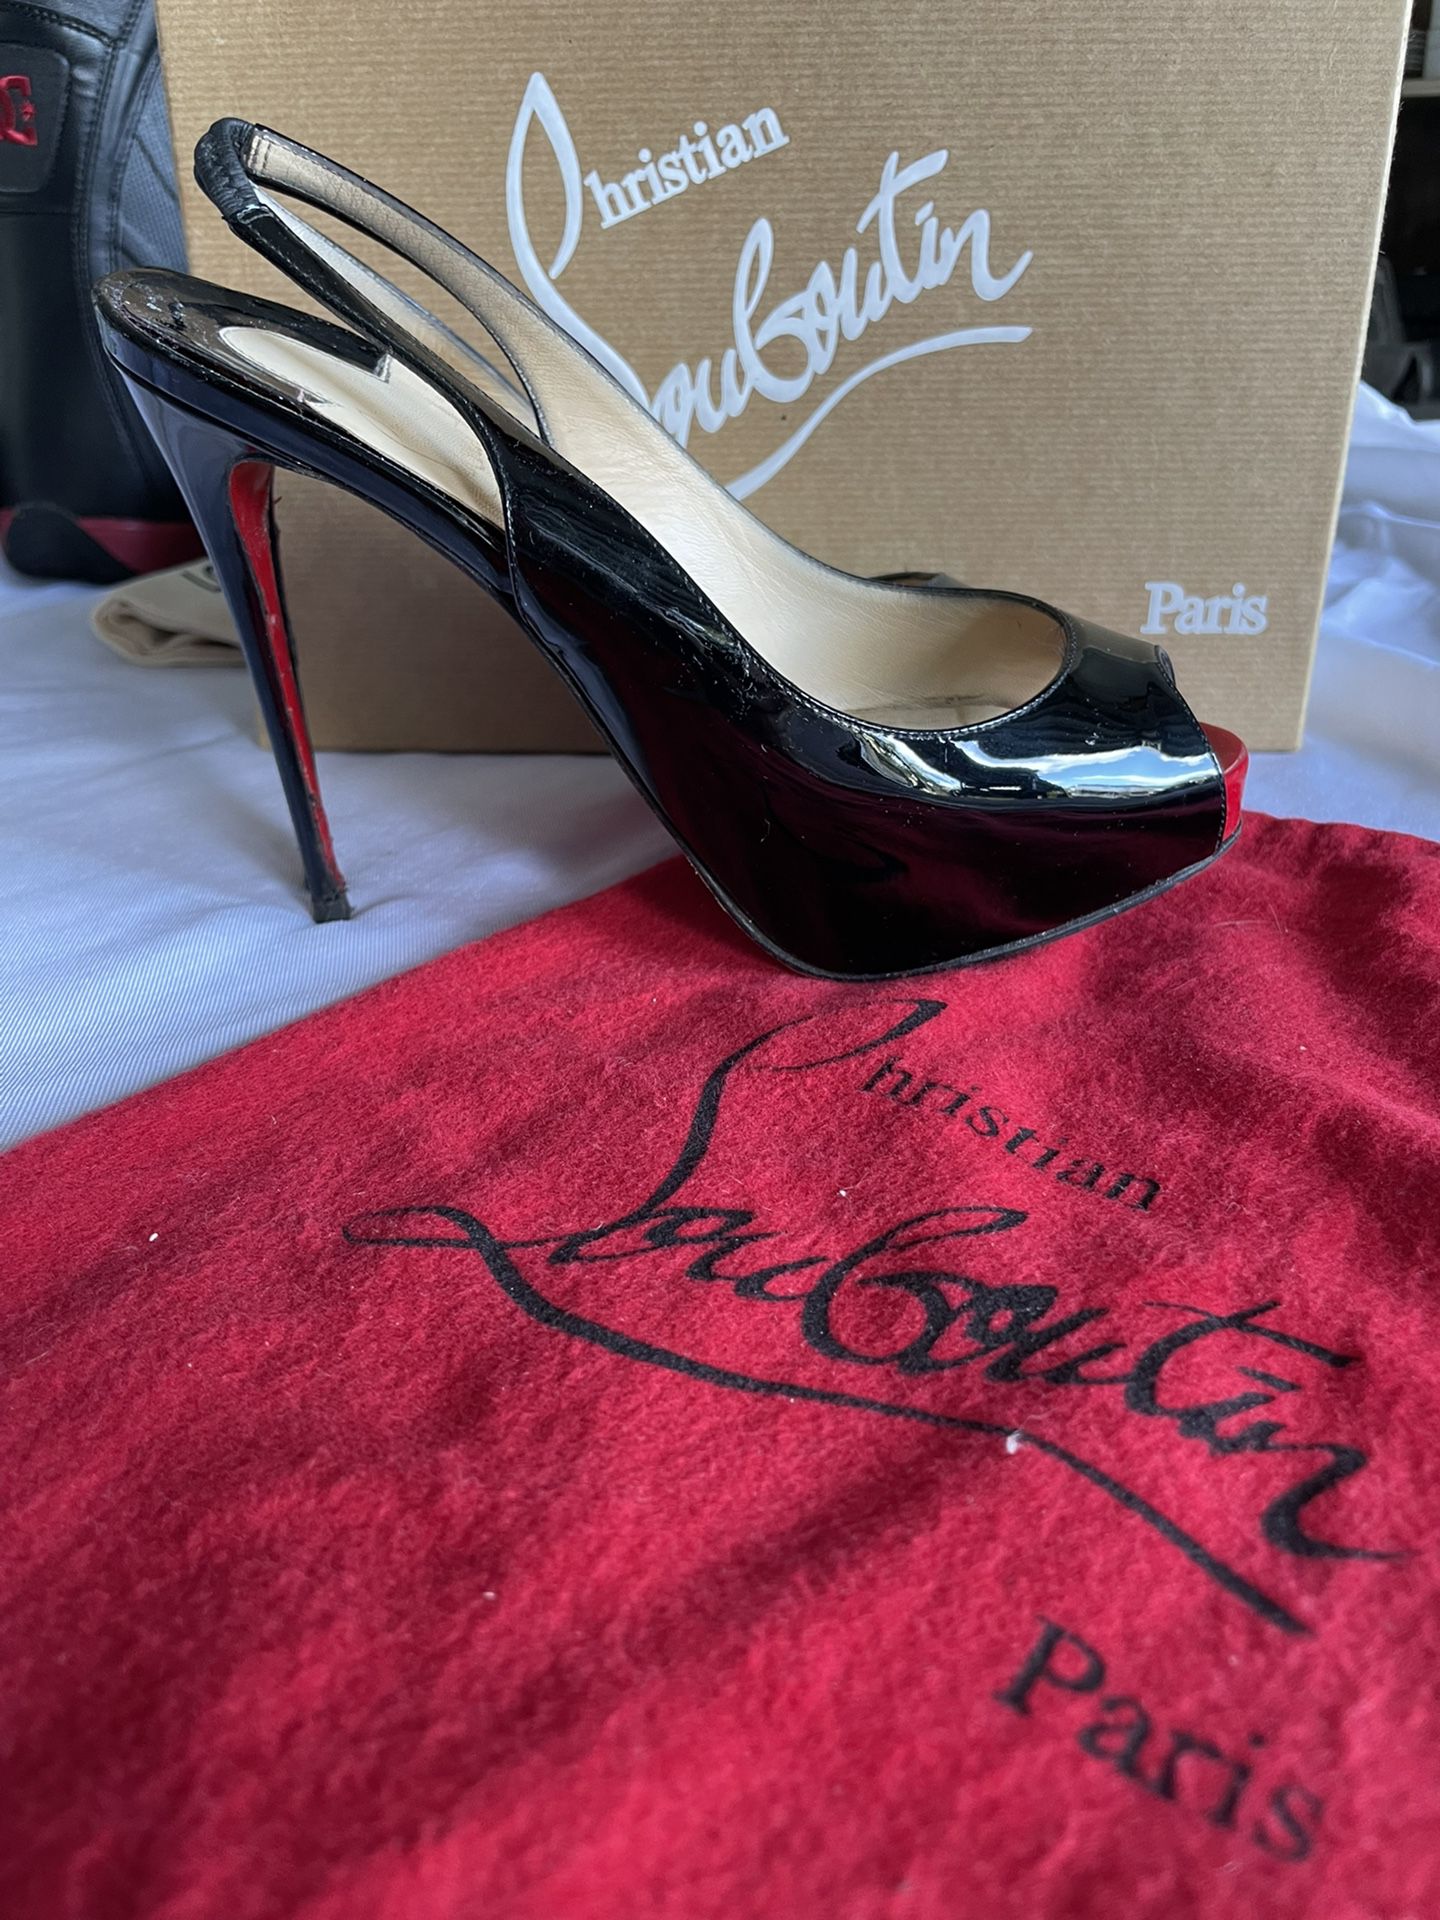 Christian Louboutin New Very Prive Patent Red Sole Pumps